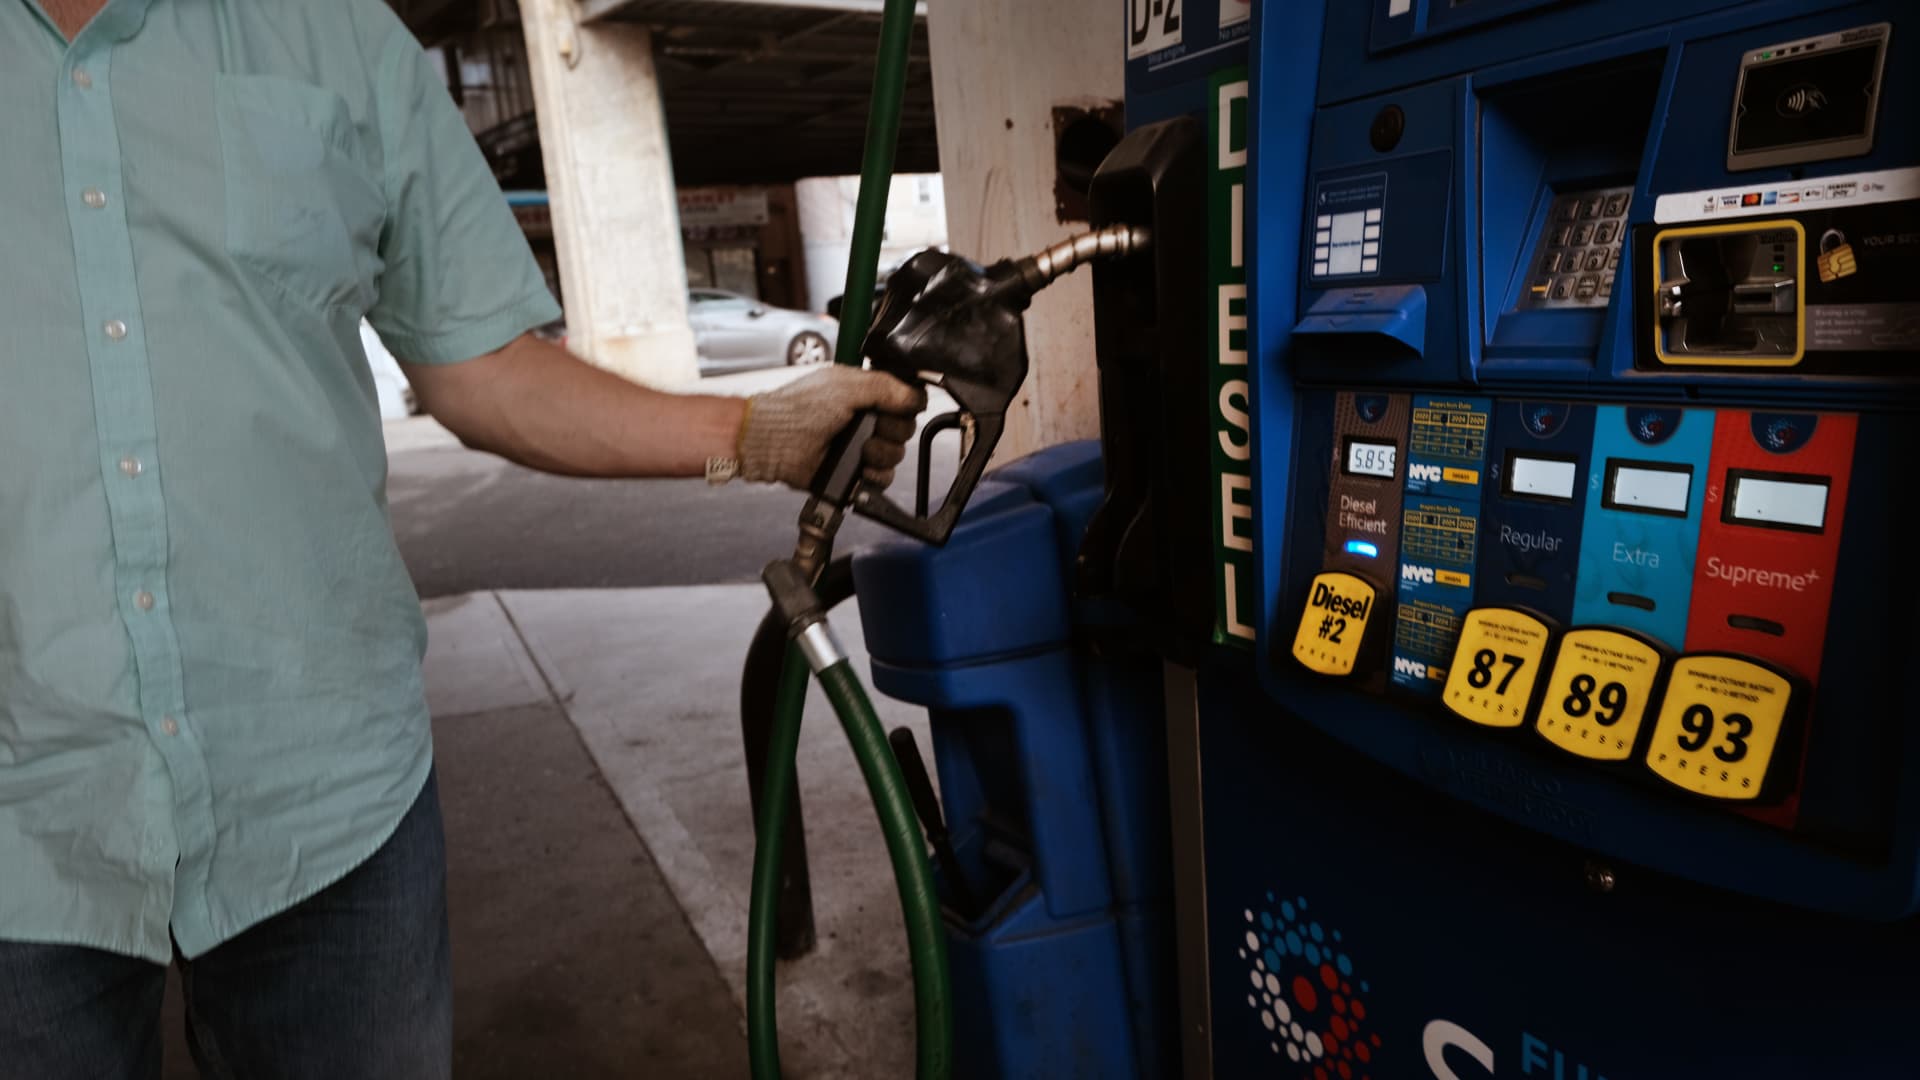 Gasoline prices are expected to continue to fall after Labor Day and some states could see below $3